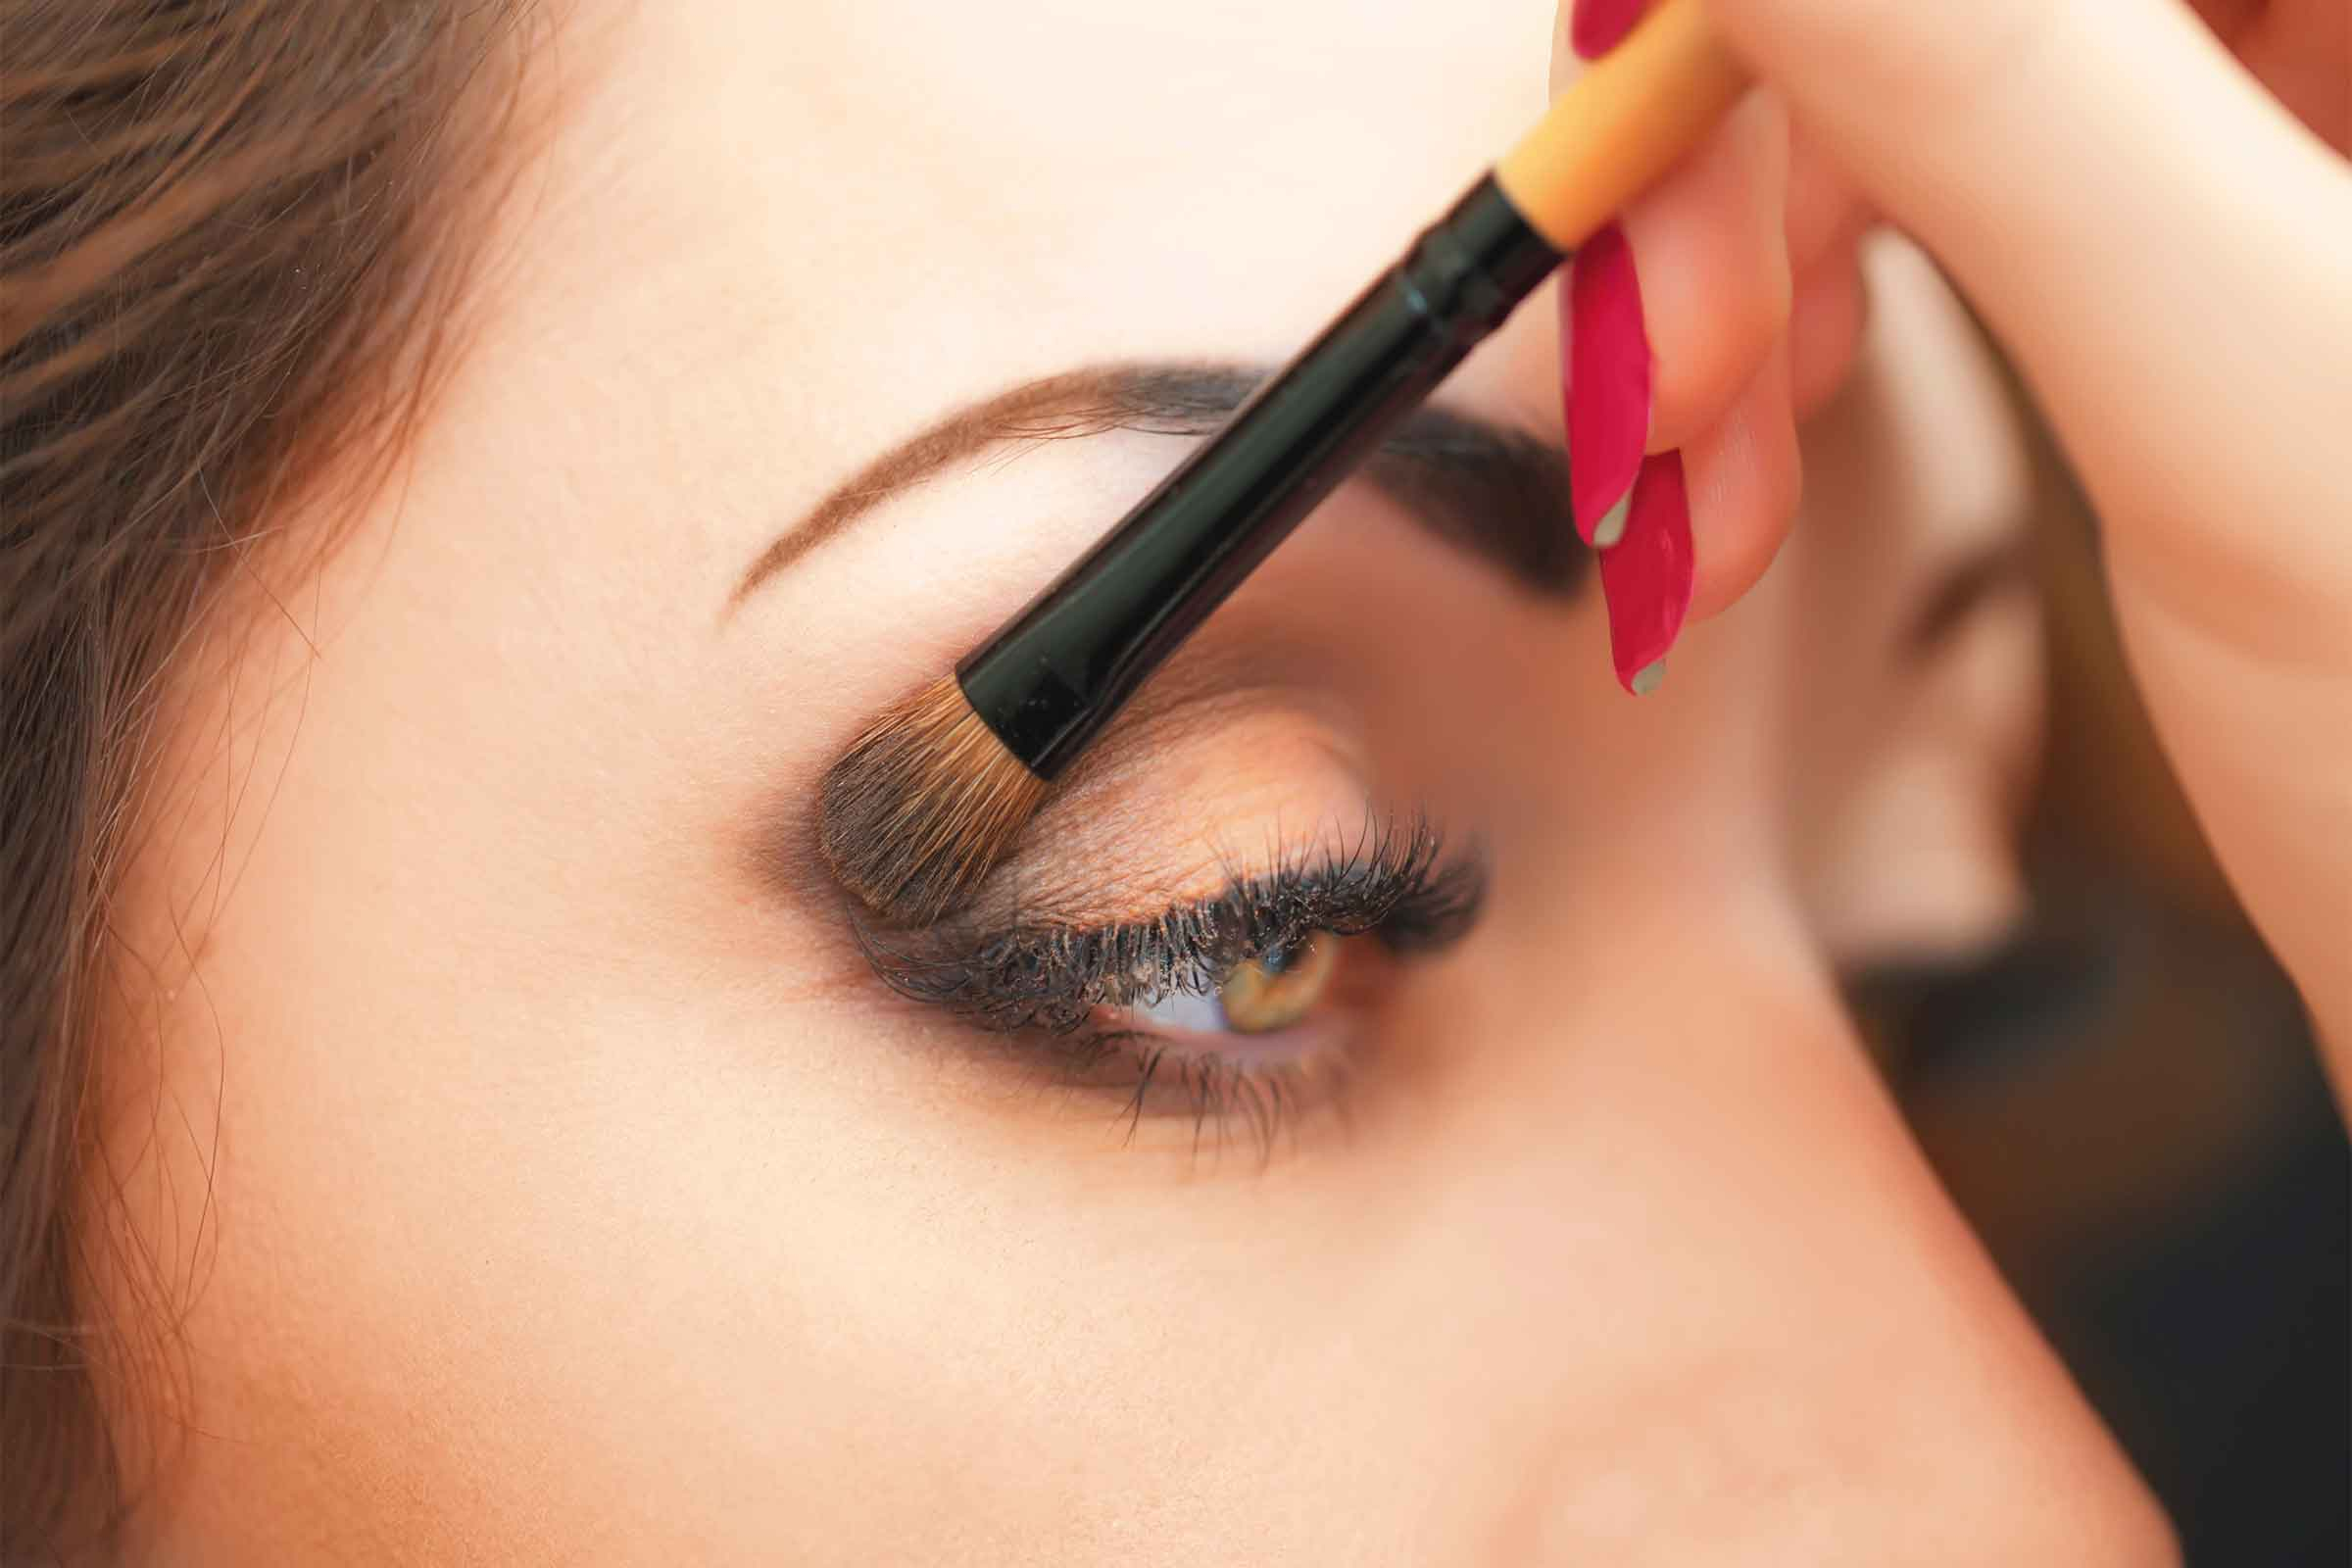 Easy Steps To Do Eye Makeup Eye Makeup Tips 7 Ways To Make Your Eyes Pop Readers Digest